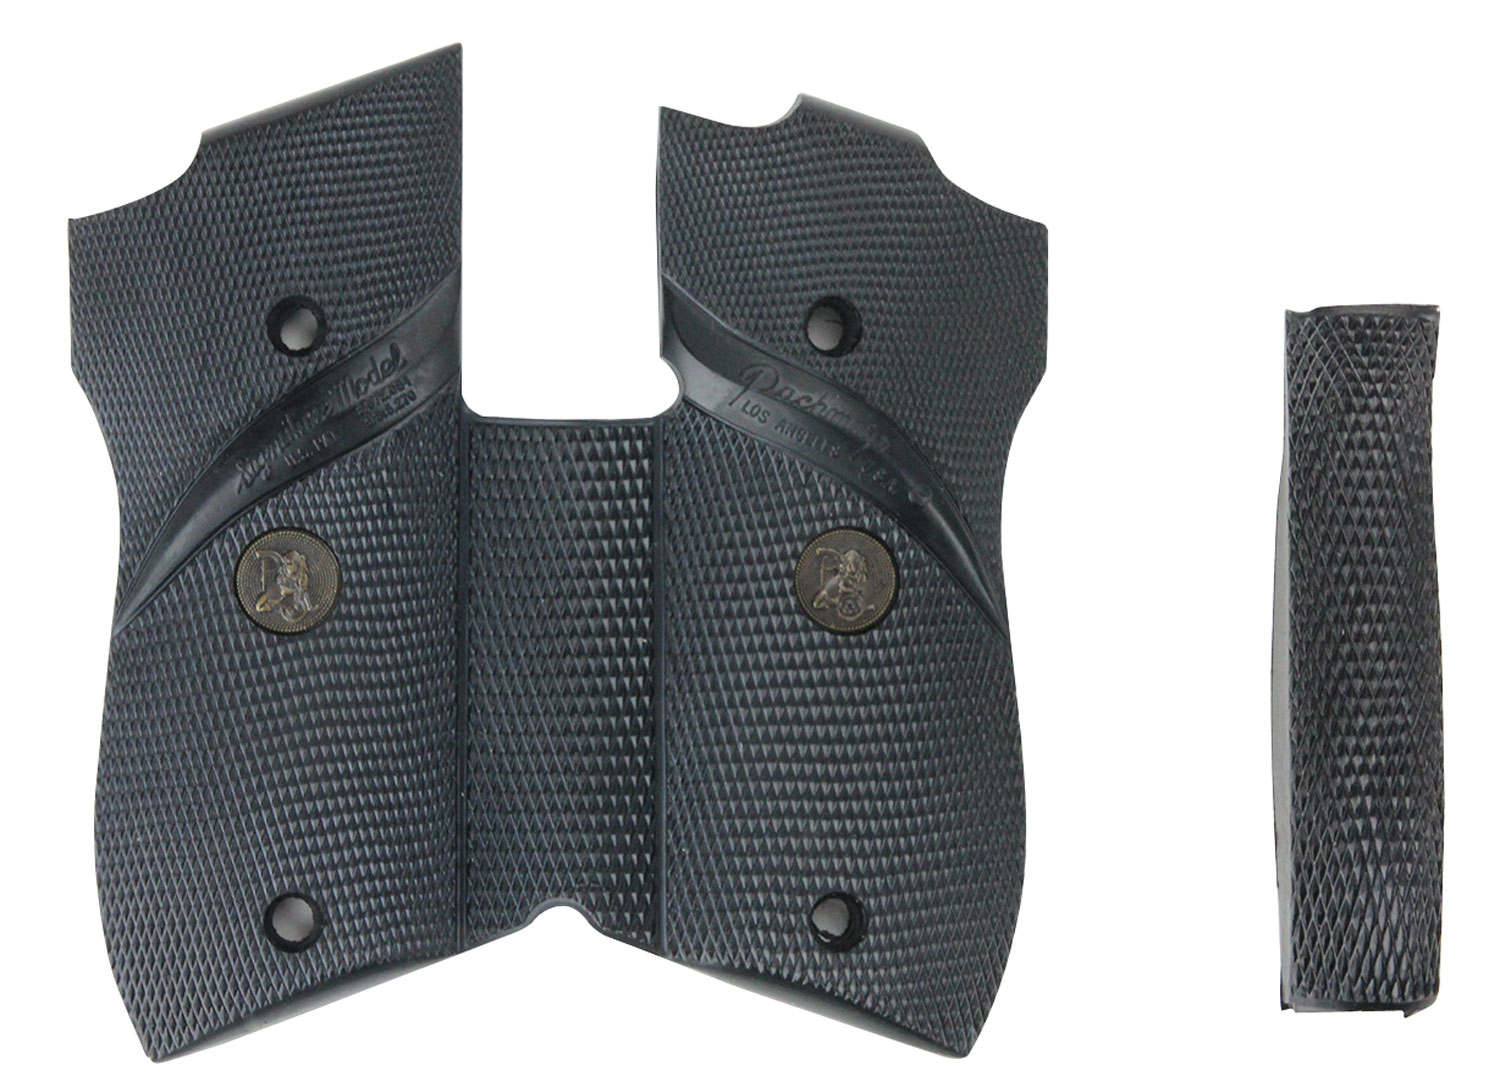 Pachmayr 03306 Signature Grip Wraparound Checkered Black Rubber with Backstrap & Finger Grooves for S&W 39, 439, 539 & 639